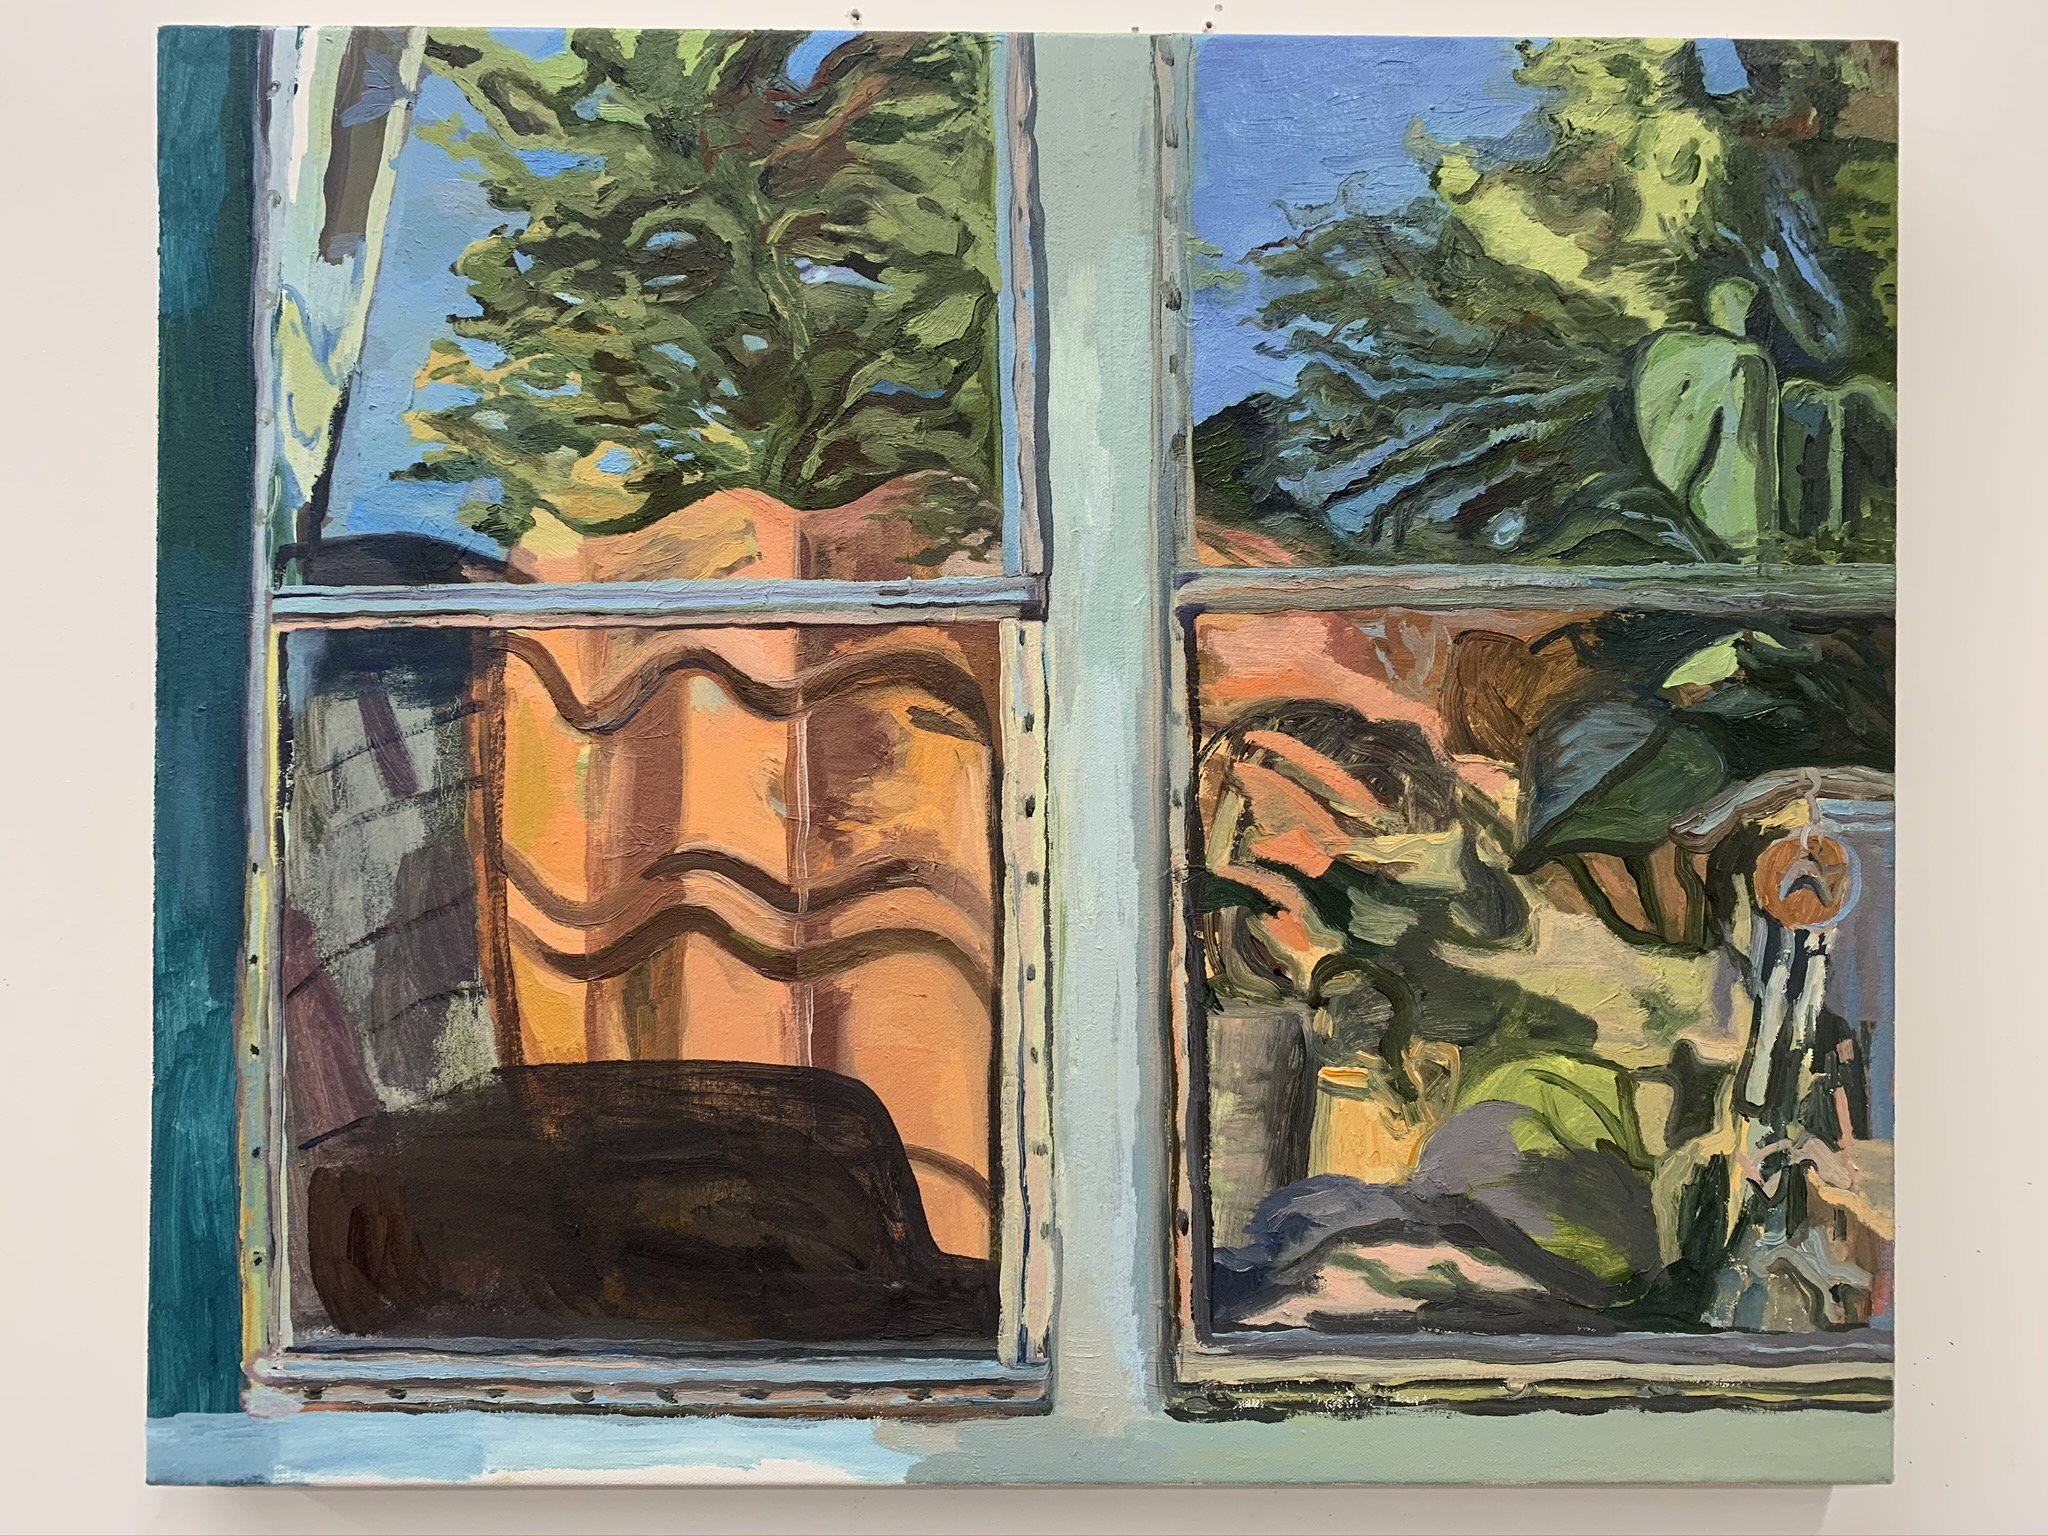 Crystal's Window, 2020, oil on linen, 20 x 24 inches